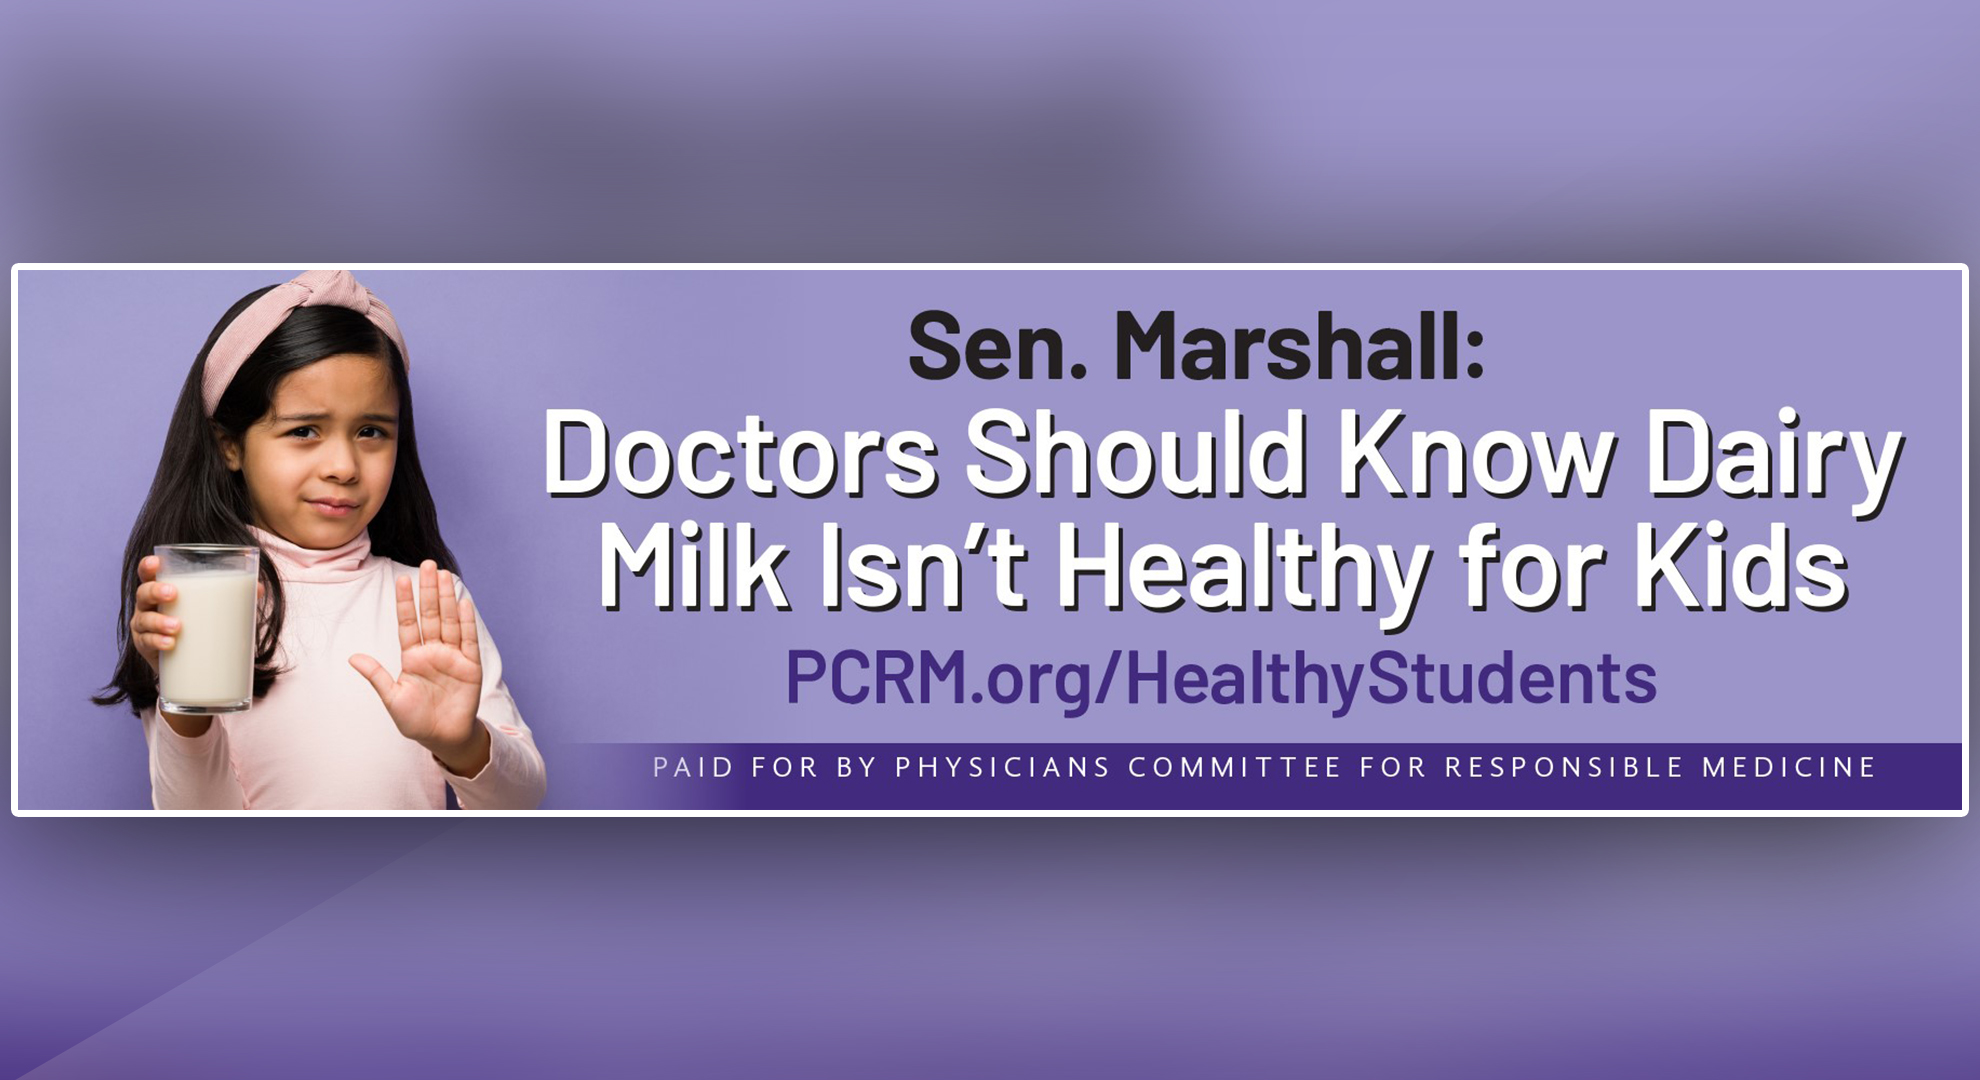 Sen. Marshall: Doctors Should Know Dairy Milk Isn’t Healthy for Kids